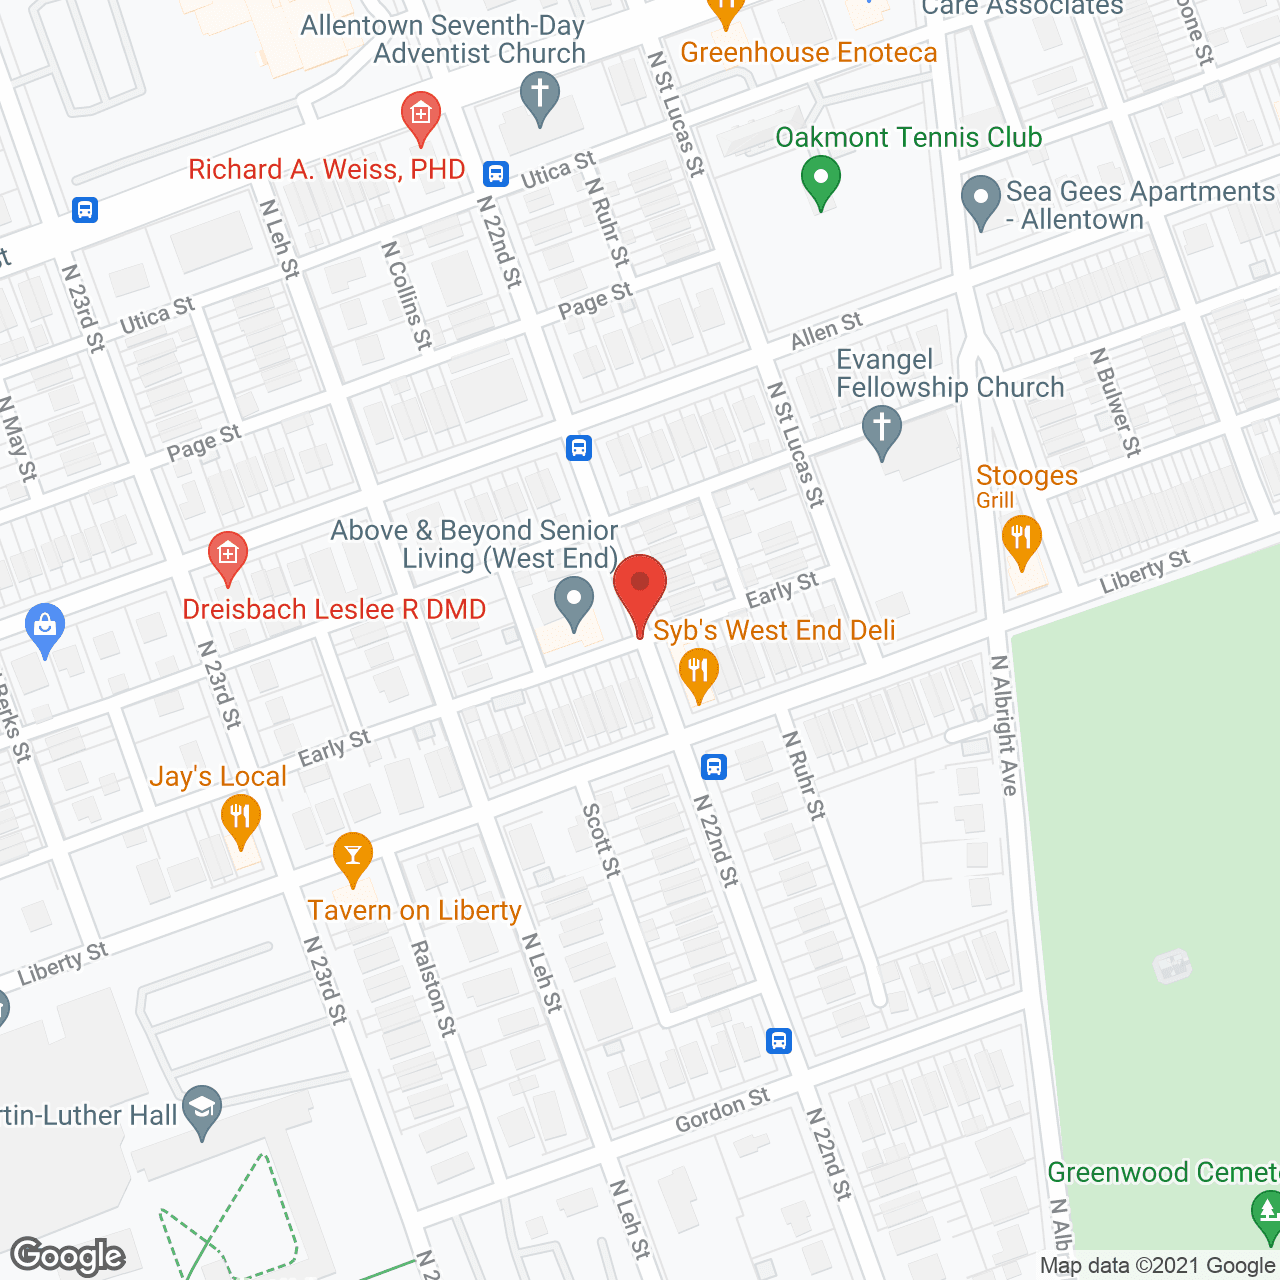 Above All Senior Care in google map